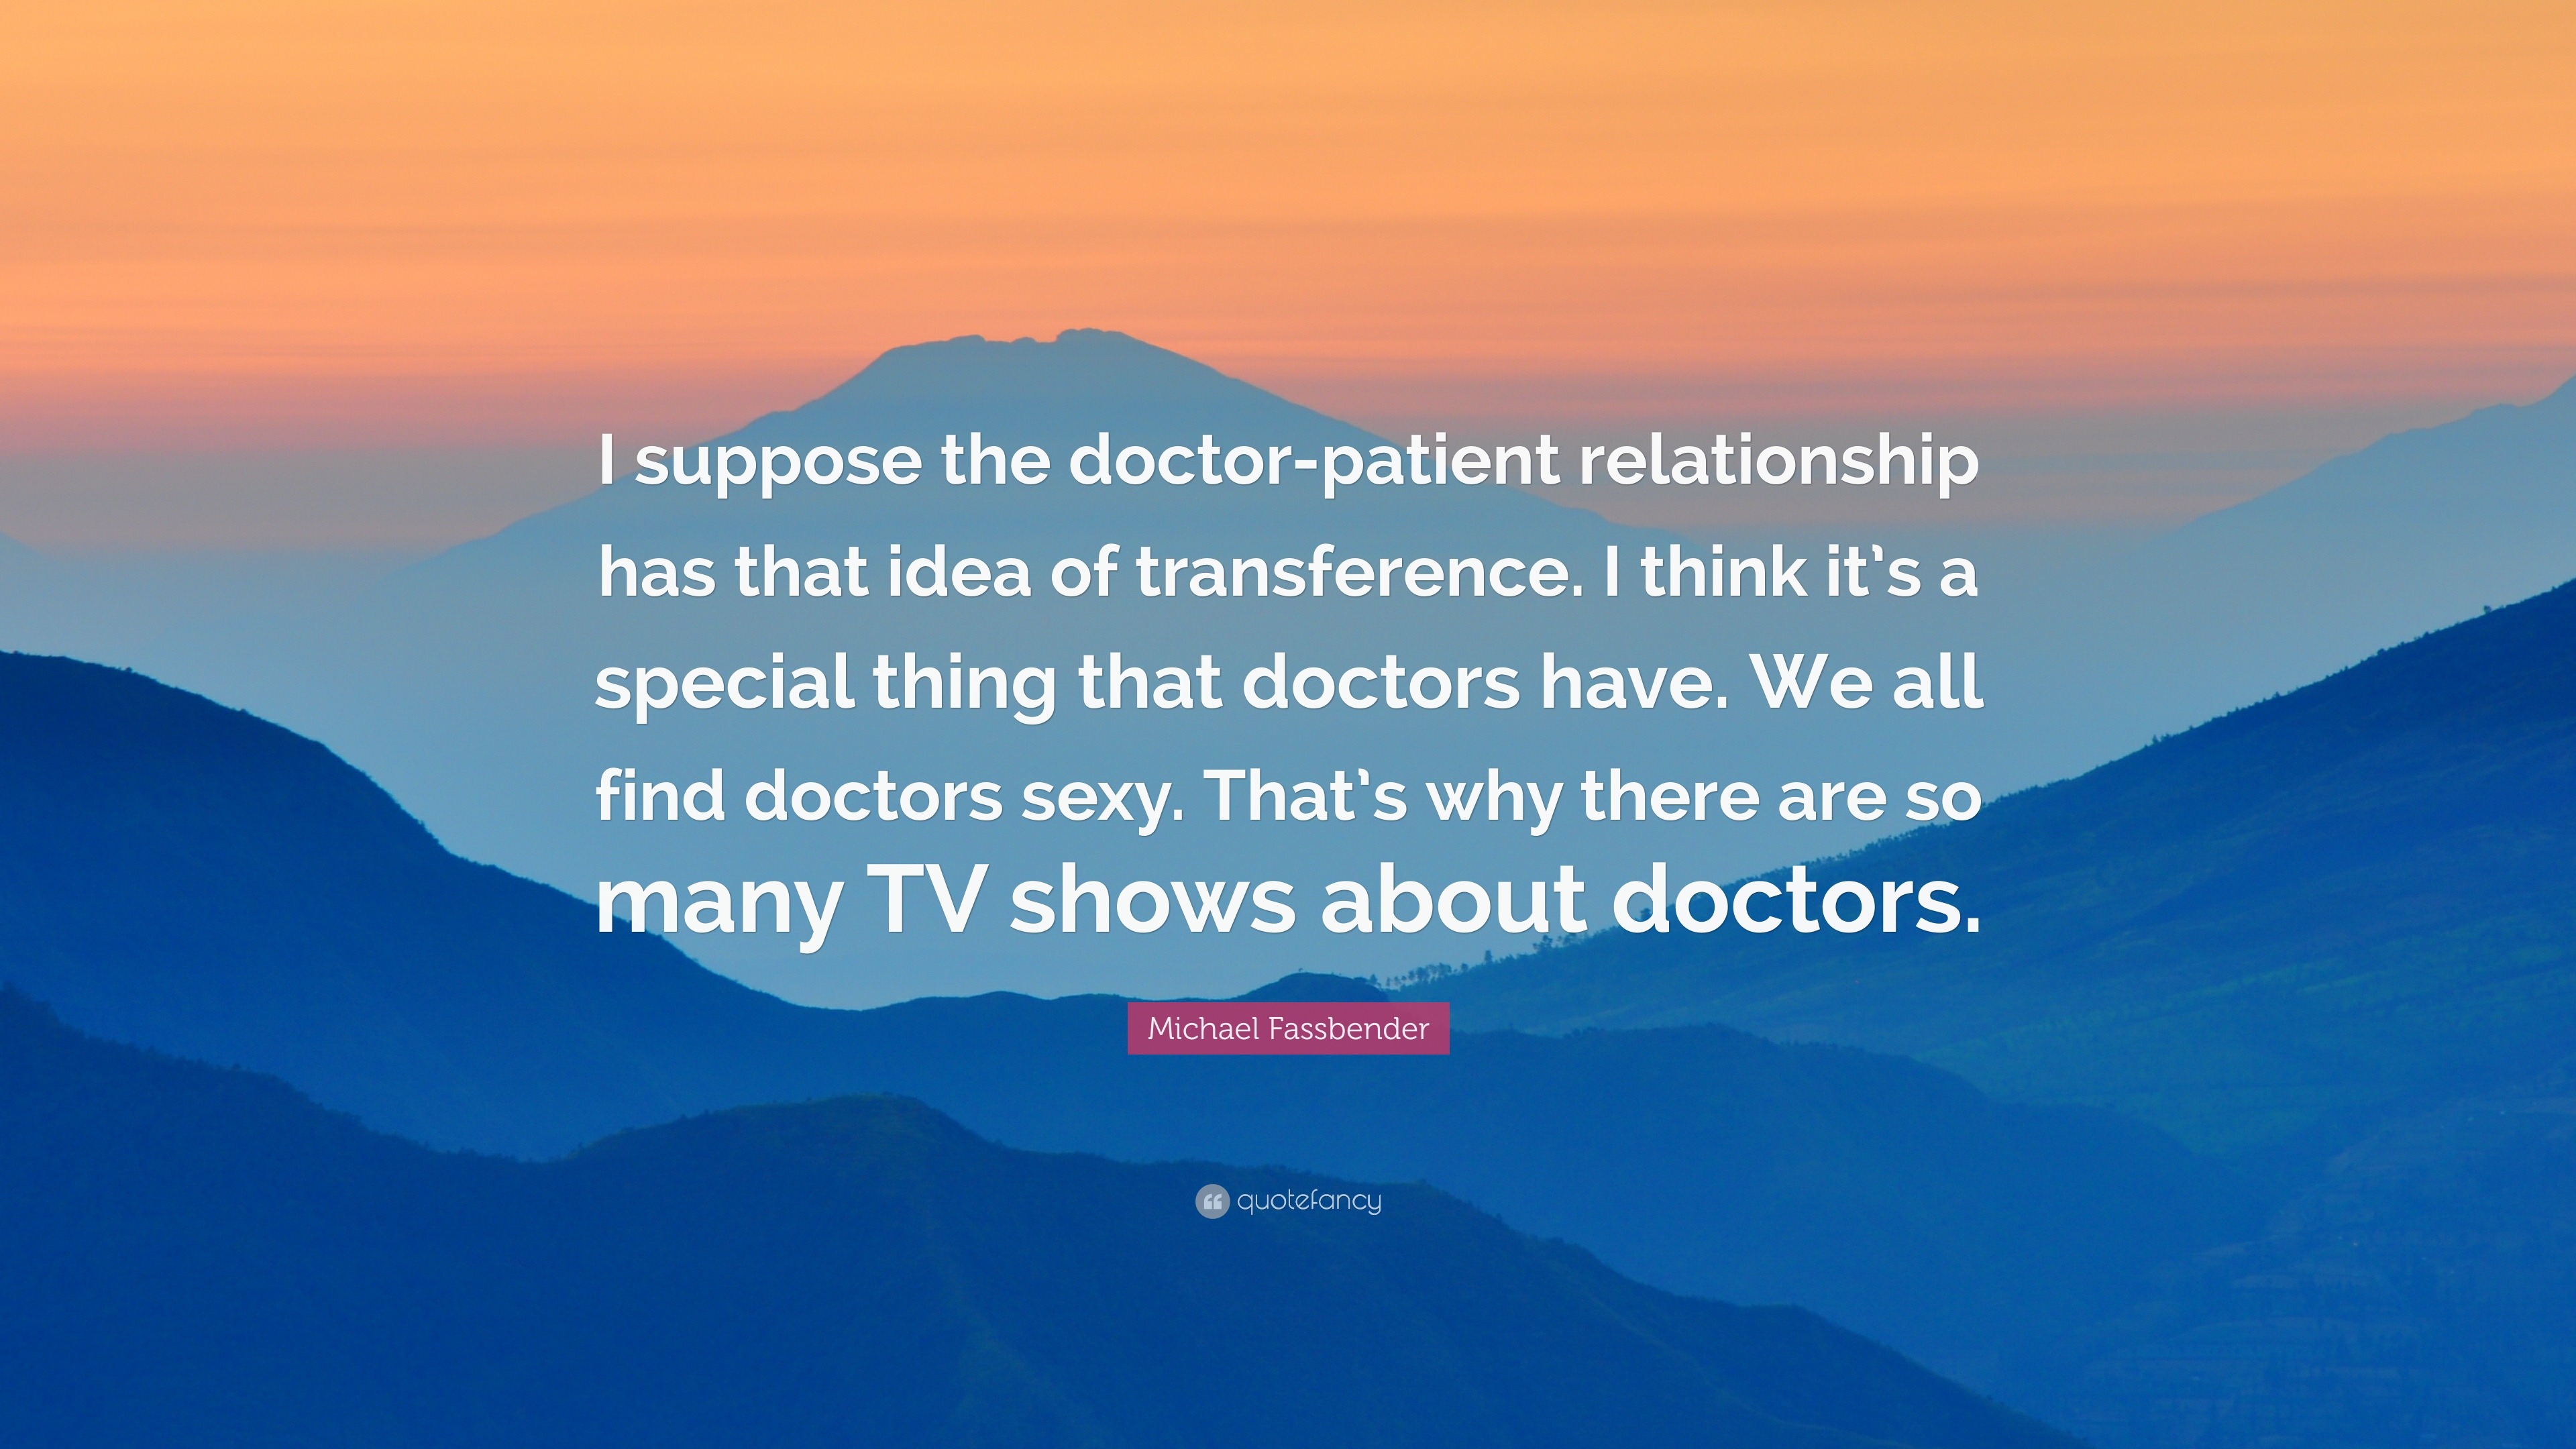 Michael Fassbender Quote: “I suppose the doctor-patient relationship has  that idea of transference. I think it's a special thing that doctors  have....”